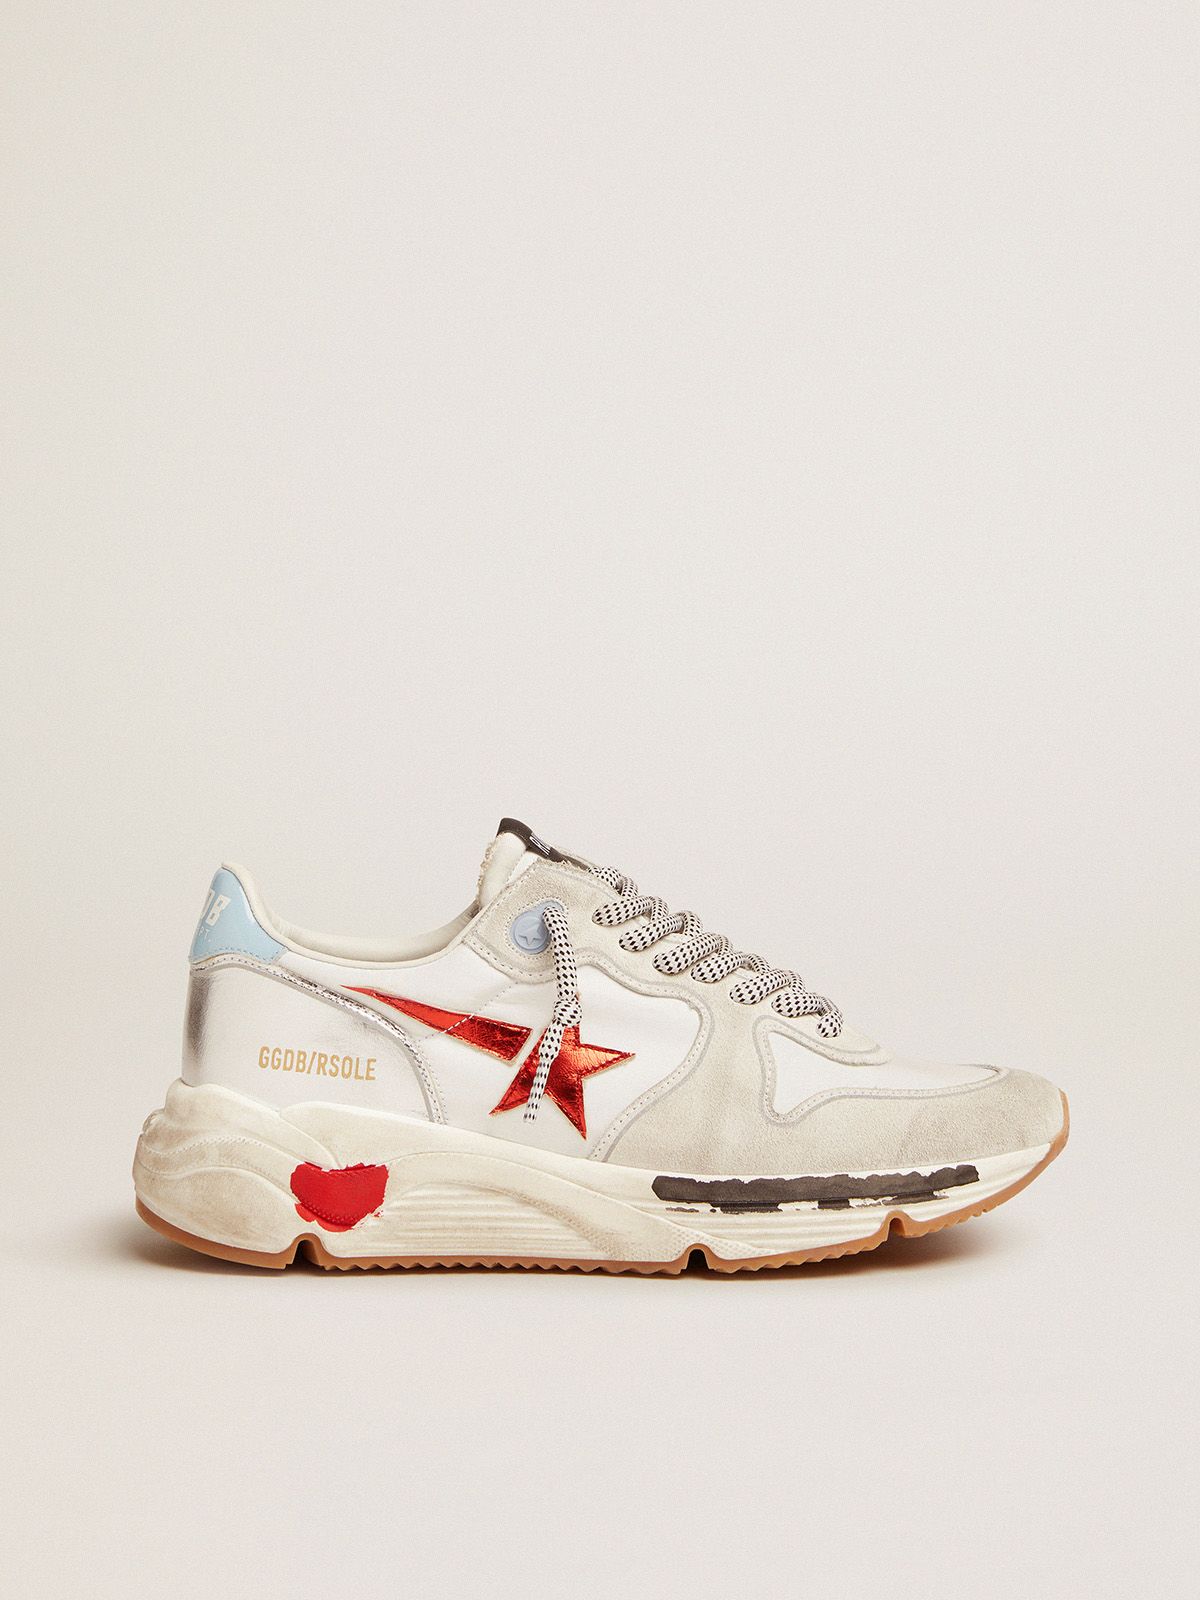 golden goose star Running nylon sneakers suede laminated leather Sole red with and in